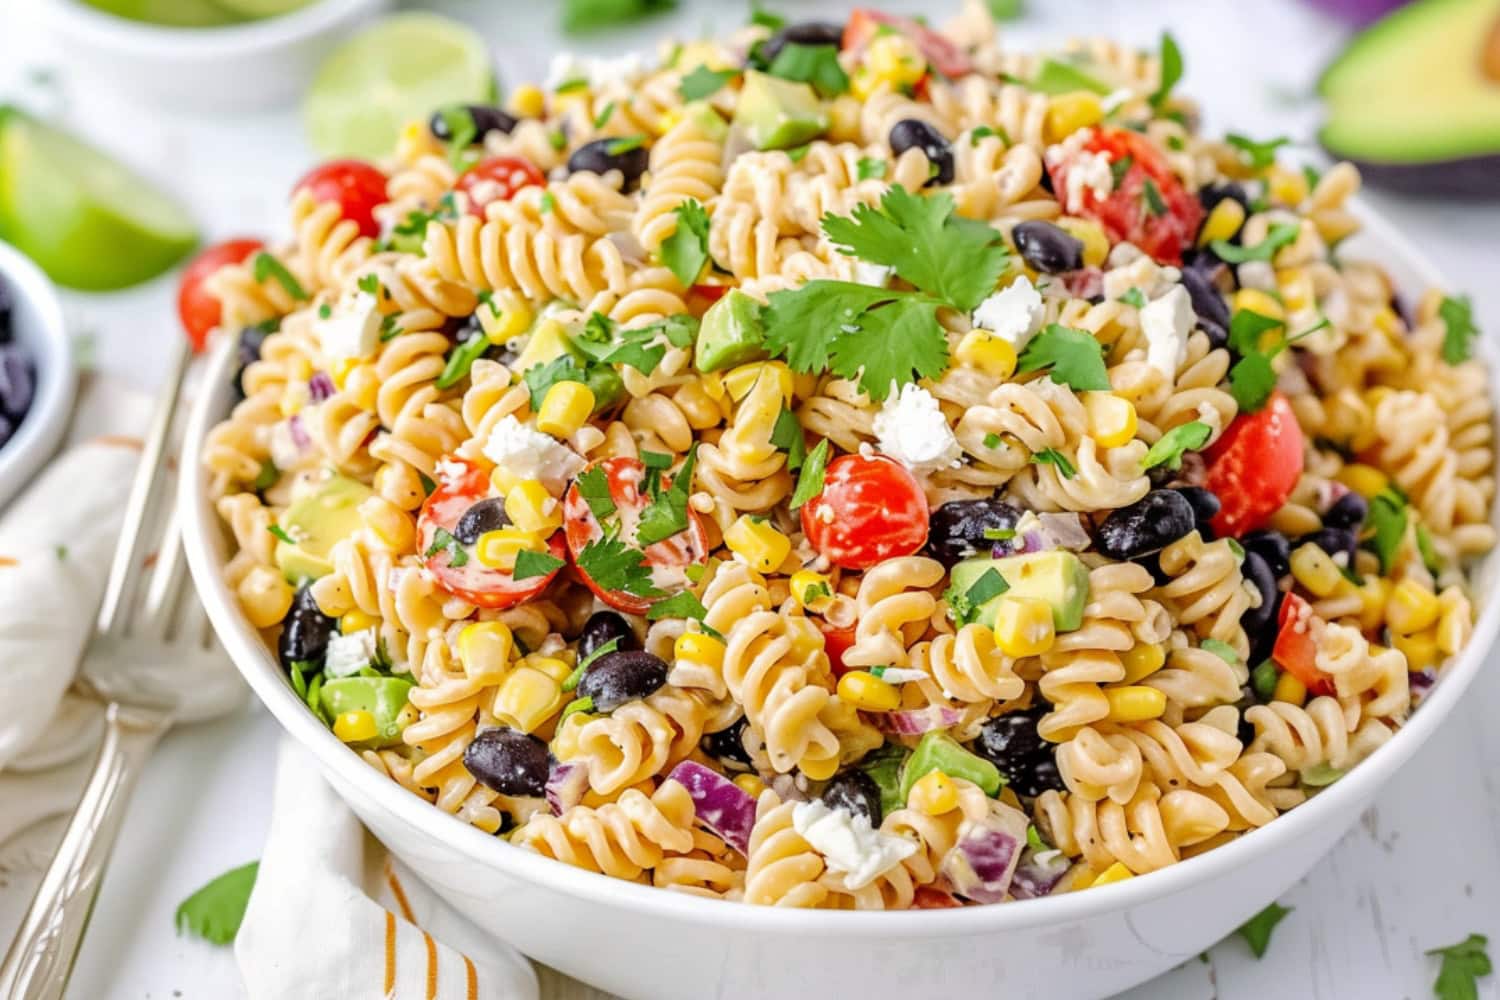 Southwest pasta salad made with black beans, corn kernels, red bell pepper diced, diced red onion, cherry tomatoes, jalapeno pepper minced, fresh cilantro chopped, avocado diced, crumbled feta cheese coated in a creamy white dressing served on a white bowl on a white wooden table.